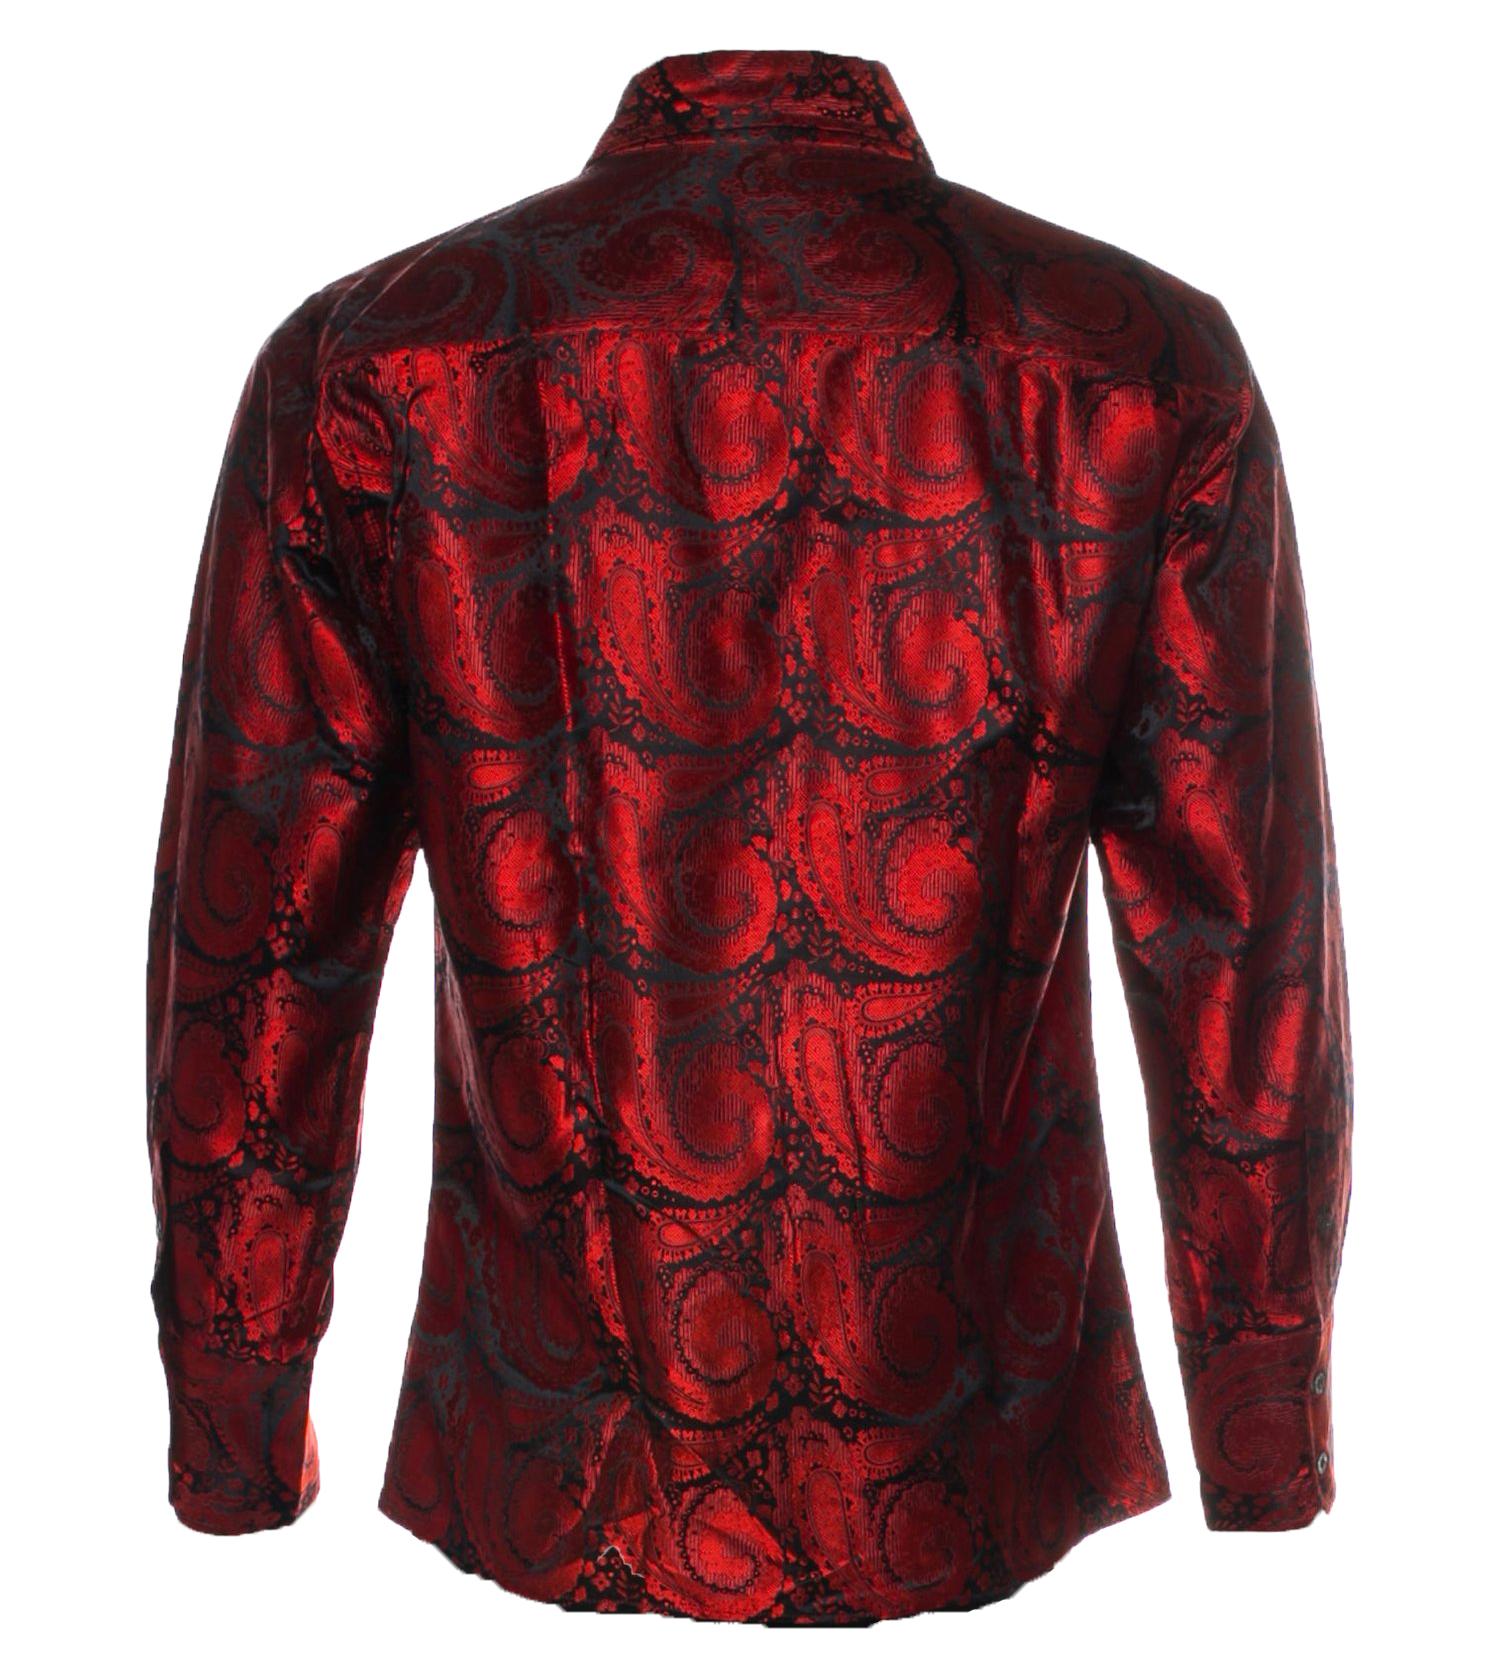 New and Rare Tom Ford for Gucci Men's Silk Button-Up Shirt
100% Silk, Diamond Red and Black Colors. 
Designer size - 42 / 16.5
Measurements: Length - 29 inches,  Sleeve - 25